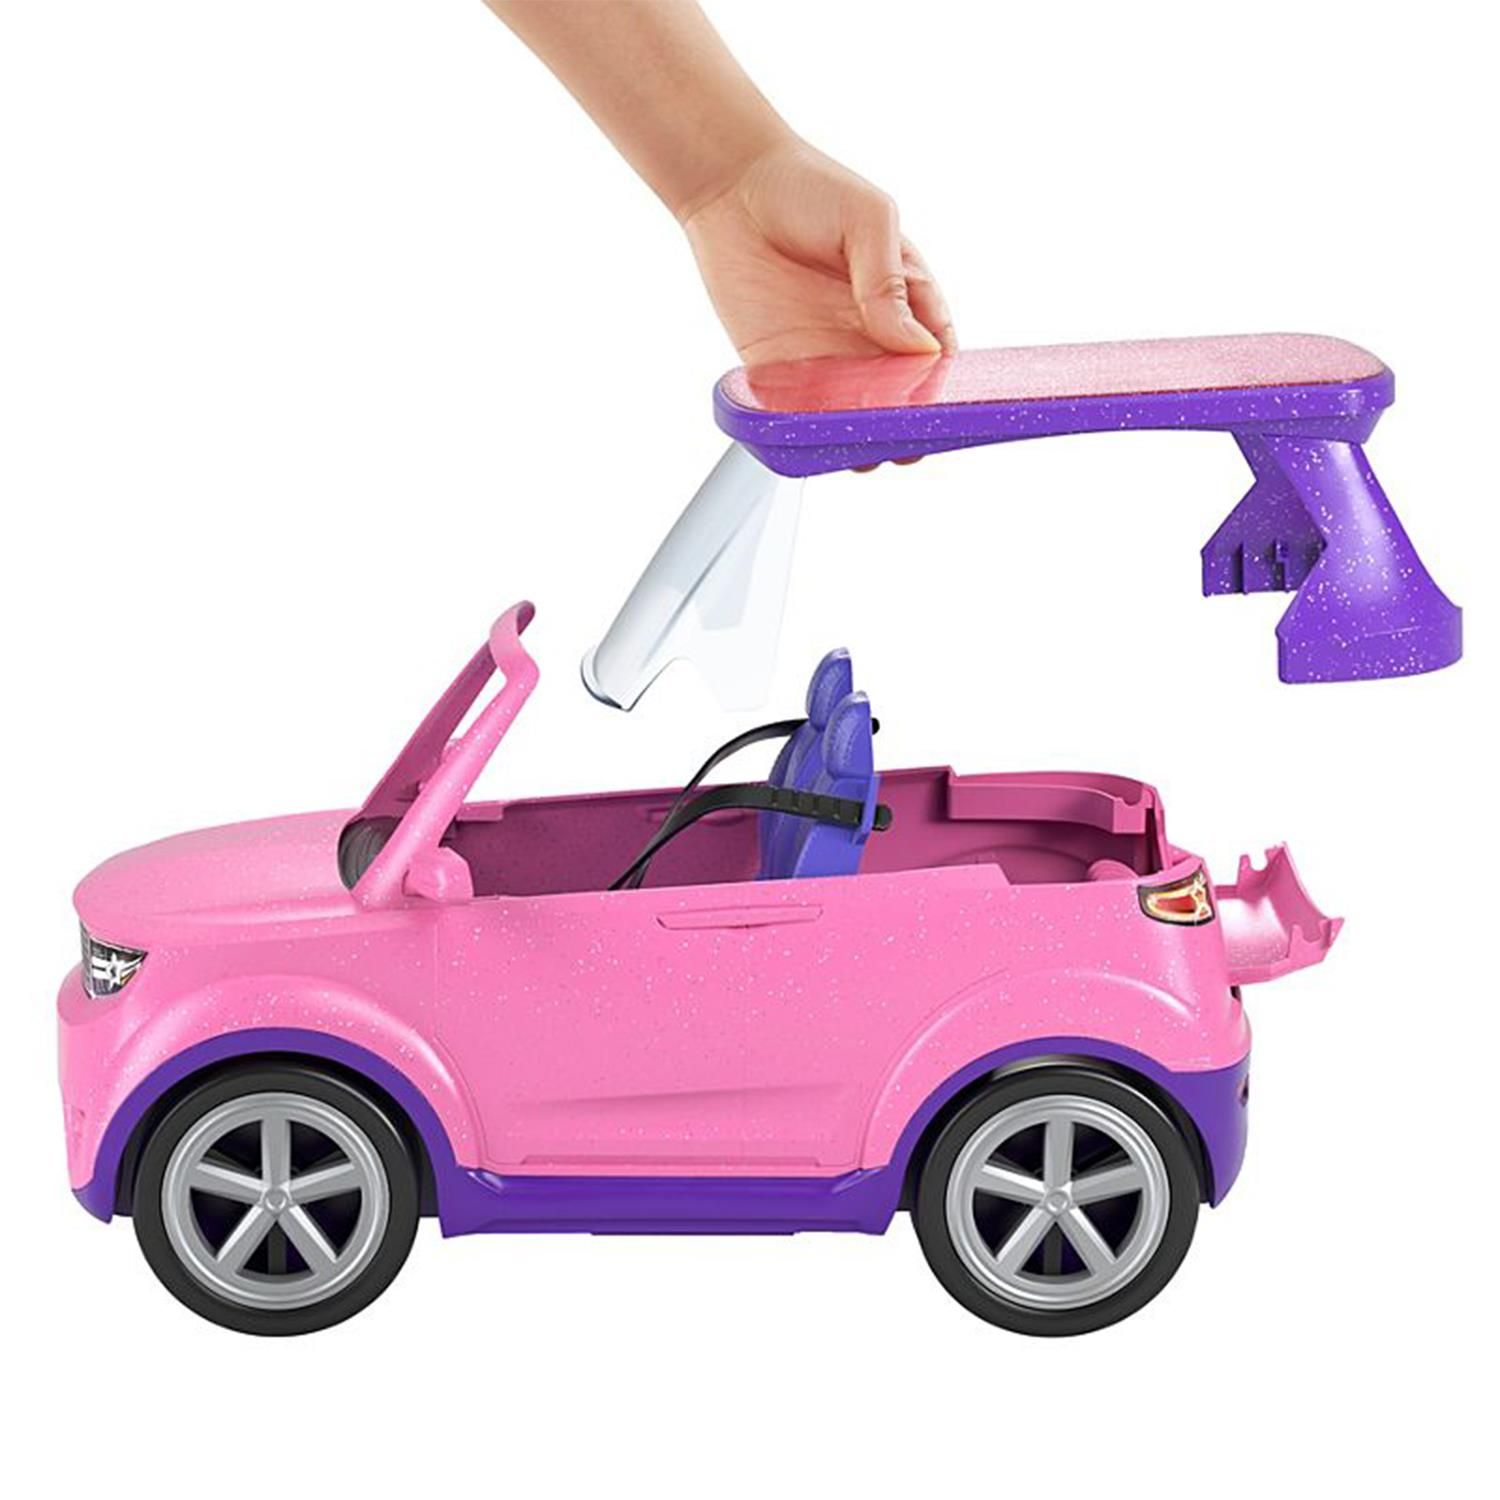 Imaginations can hit the road and play out rockin’ adventures with this transforming Barbie® vehicle playset inspired by Barbie: Big City, Big Dreams™ ! Ready to take the show on the road? Buckle two Barbie® dolls in (dolls sold separately), then park and transform the vehicle to set the scene for a pop-up performance! The glittery pink SUV features a removeable roof that becomes a stage, removeable seats that become seating for an audience and over 20 storytelling accessories including a drum set and stool, speaker and turntable, microphones and more. Future stars ages 3 years old and up can dream up all kinds of big adventures with this transforming Barbie® vehicle! Dolls sold separately. Colors and decorations may vary.

Features:

This Barbie® vehicle playset inspired by Barbie: Big City, Big Dreams™ transforms to reveal a stage and seating for a pop-up performance!
Take the show on the road in a glittery pink and purple SUV with rolling wheels, realistic details and room for 2 Barbie® dolls (sold separately).
Remove the roof to set up a stage for Barbie® doll and remove the seats to create a place for the audience to cheer her on!
Over 20 storytelling pieces include a drum set, speaker and turntable, microphones, snacks, backstage passes, smart phone accessories and more!
Pack the pieces back inside the car for easy clean-up.
With so many storytelling opportunities, this Barbie: Big City, Big Dreams™ vehicle playset makes a great gift for 3 to 7 year olds, especially those that love the spotlight!

Box Contains: Barbie Big City and Big Dream Playset.

Playset Includes: Transforming SUV Car, Handbags, Microphones, Snacks, Backstage Passes, Smart phone accessories, Drum set, Speaker.